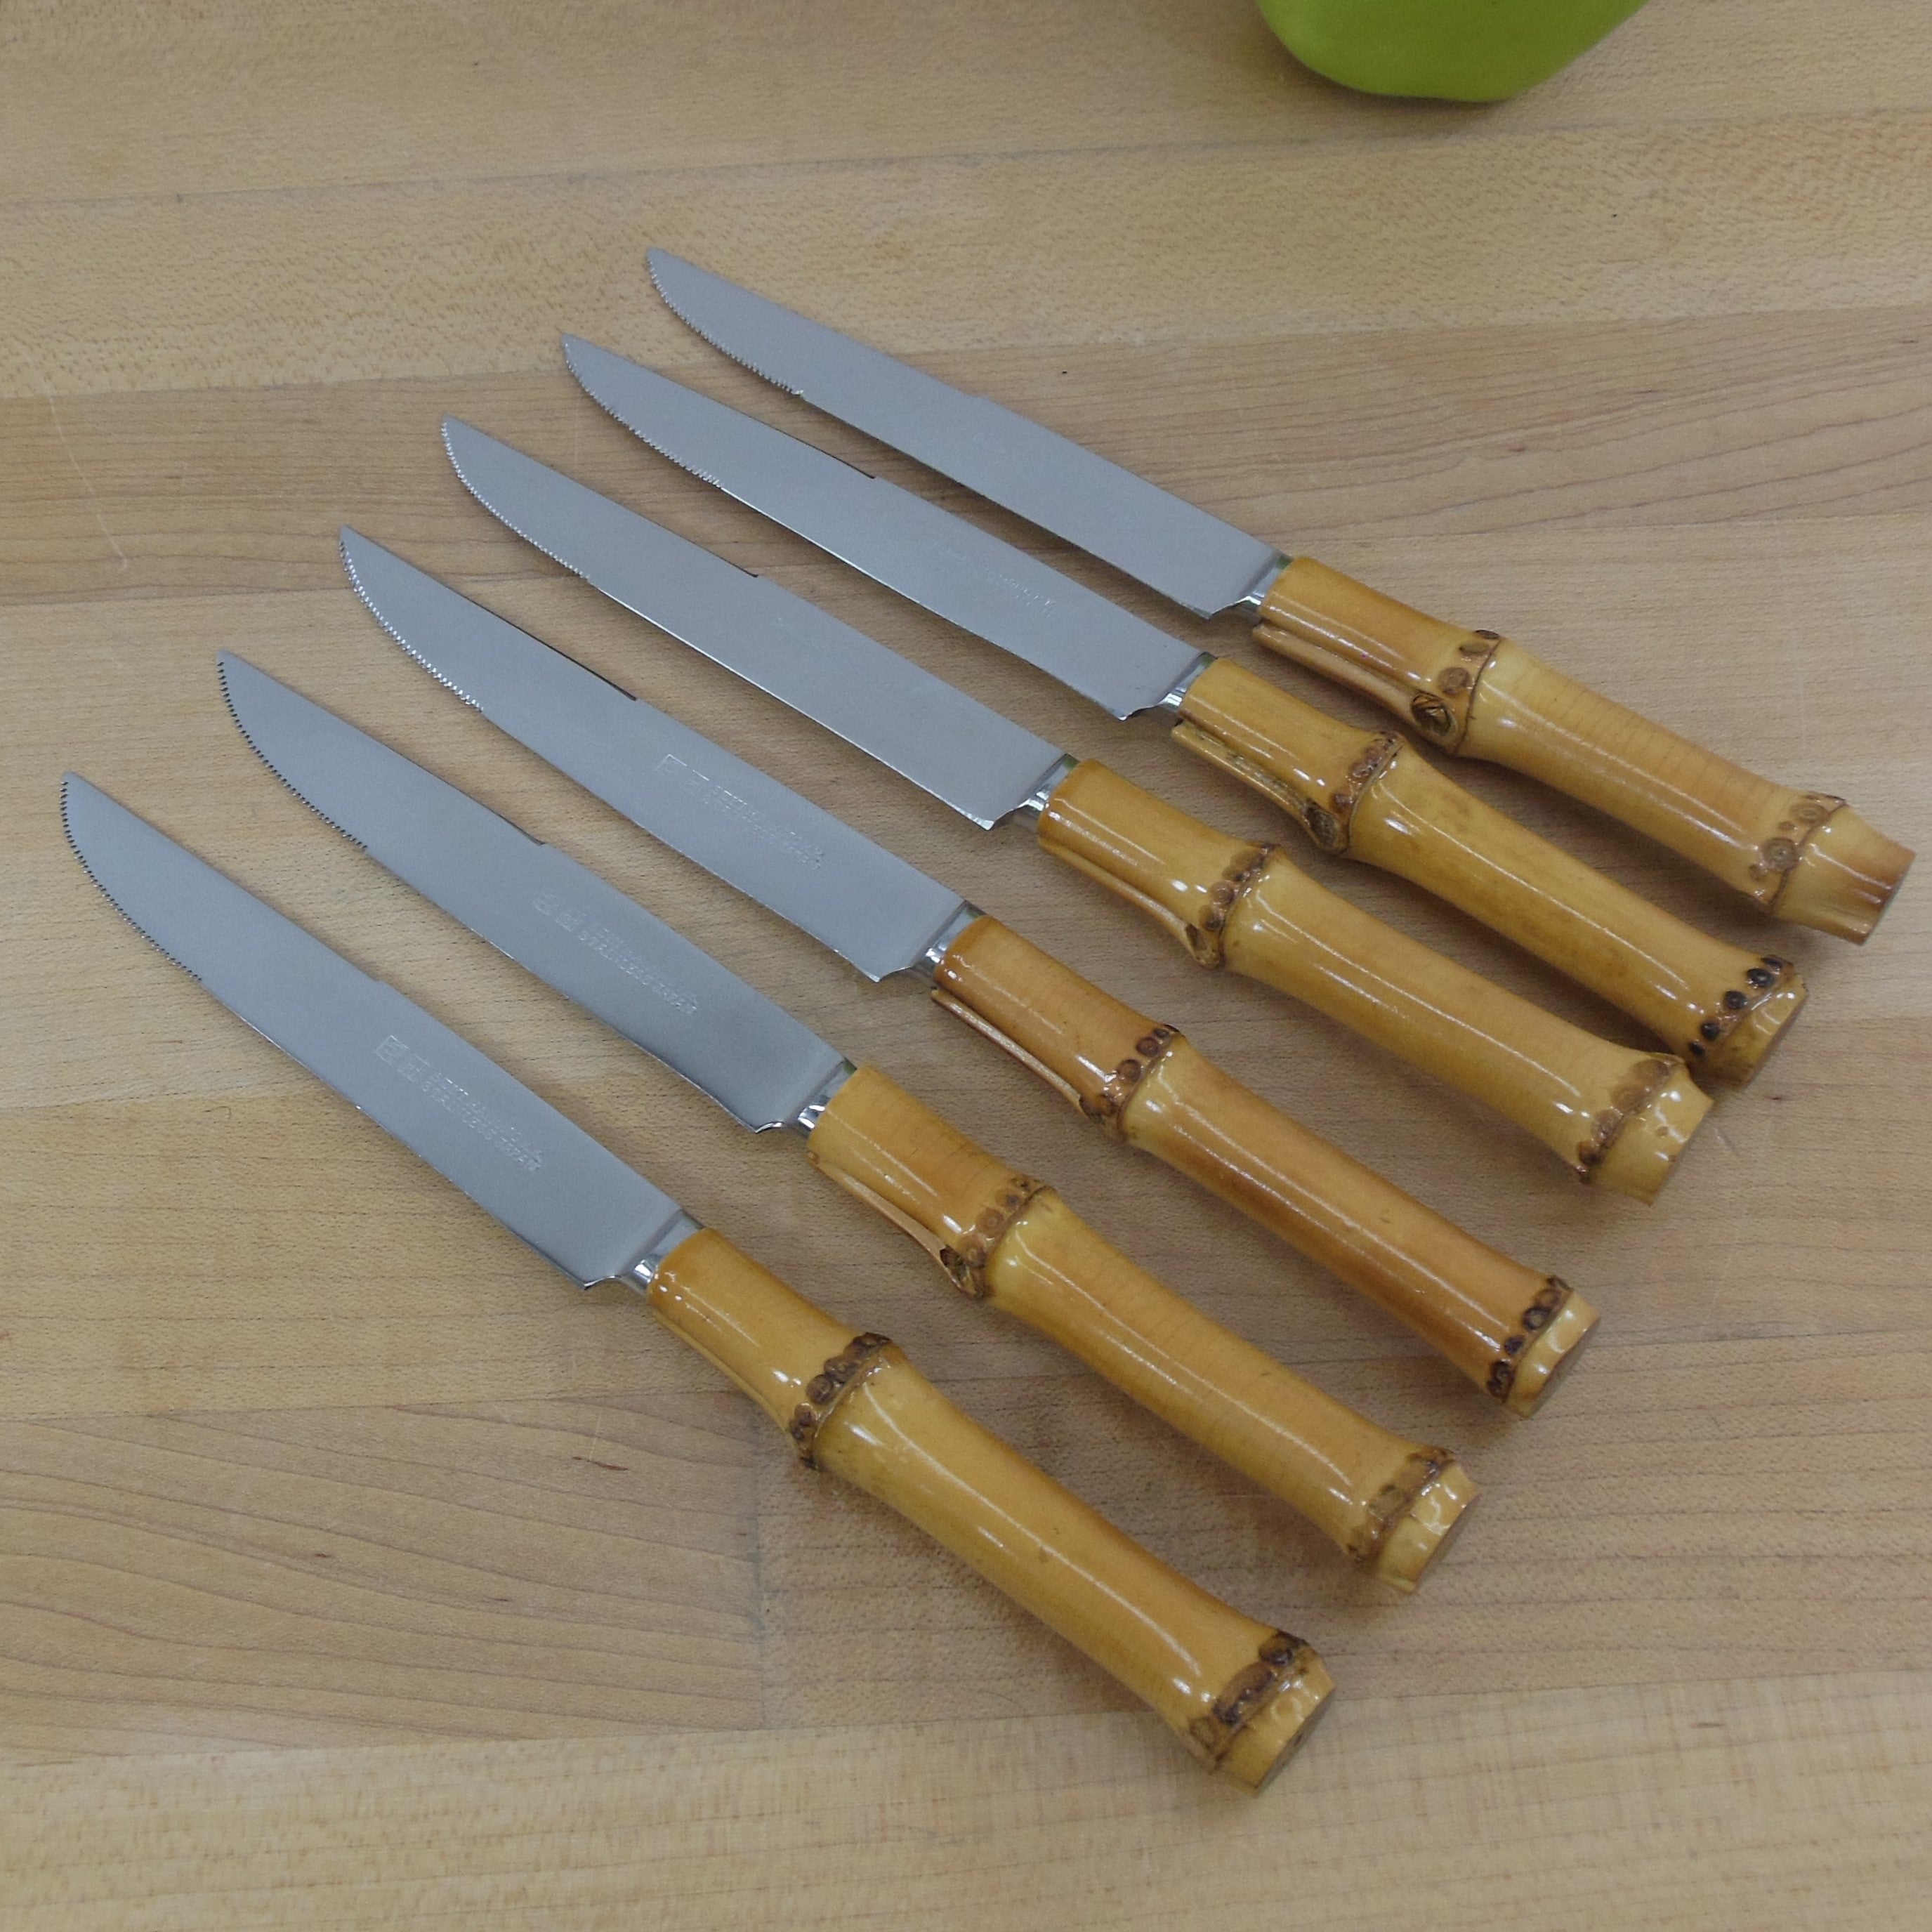 Vintage Japanese Steak Knife Set of 8 Mismatched Wooden Handles Cutlery  Carving Knives BBQ Cookout Parrilla Kitchen Cutlery Panchosporch -   Finland